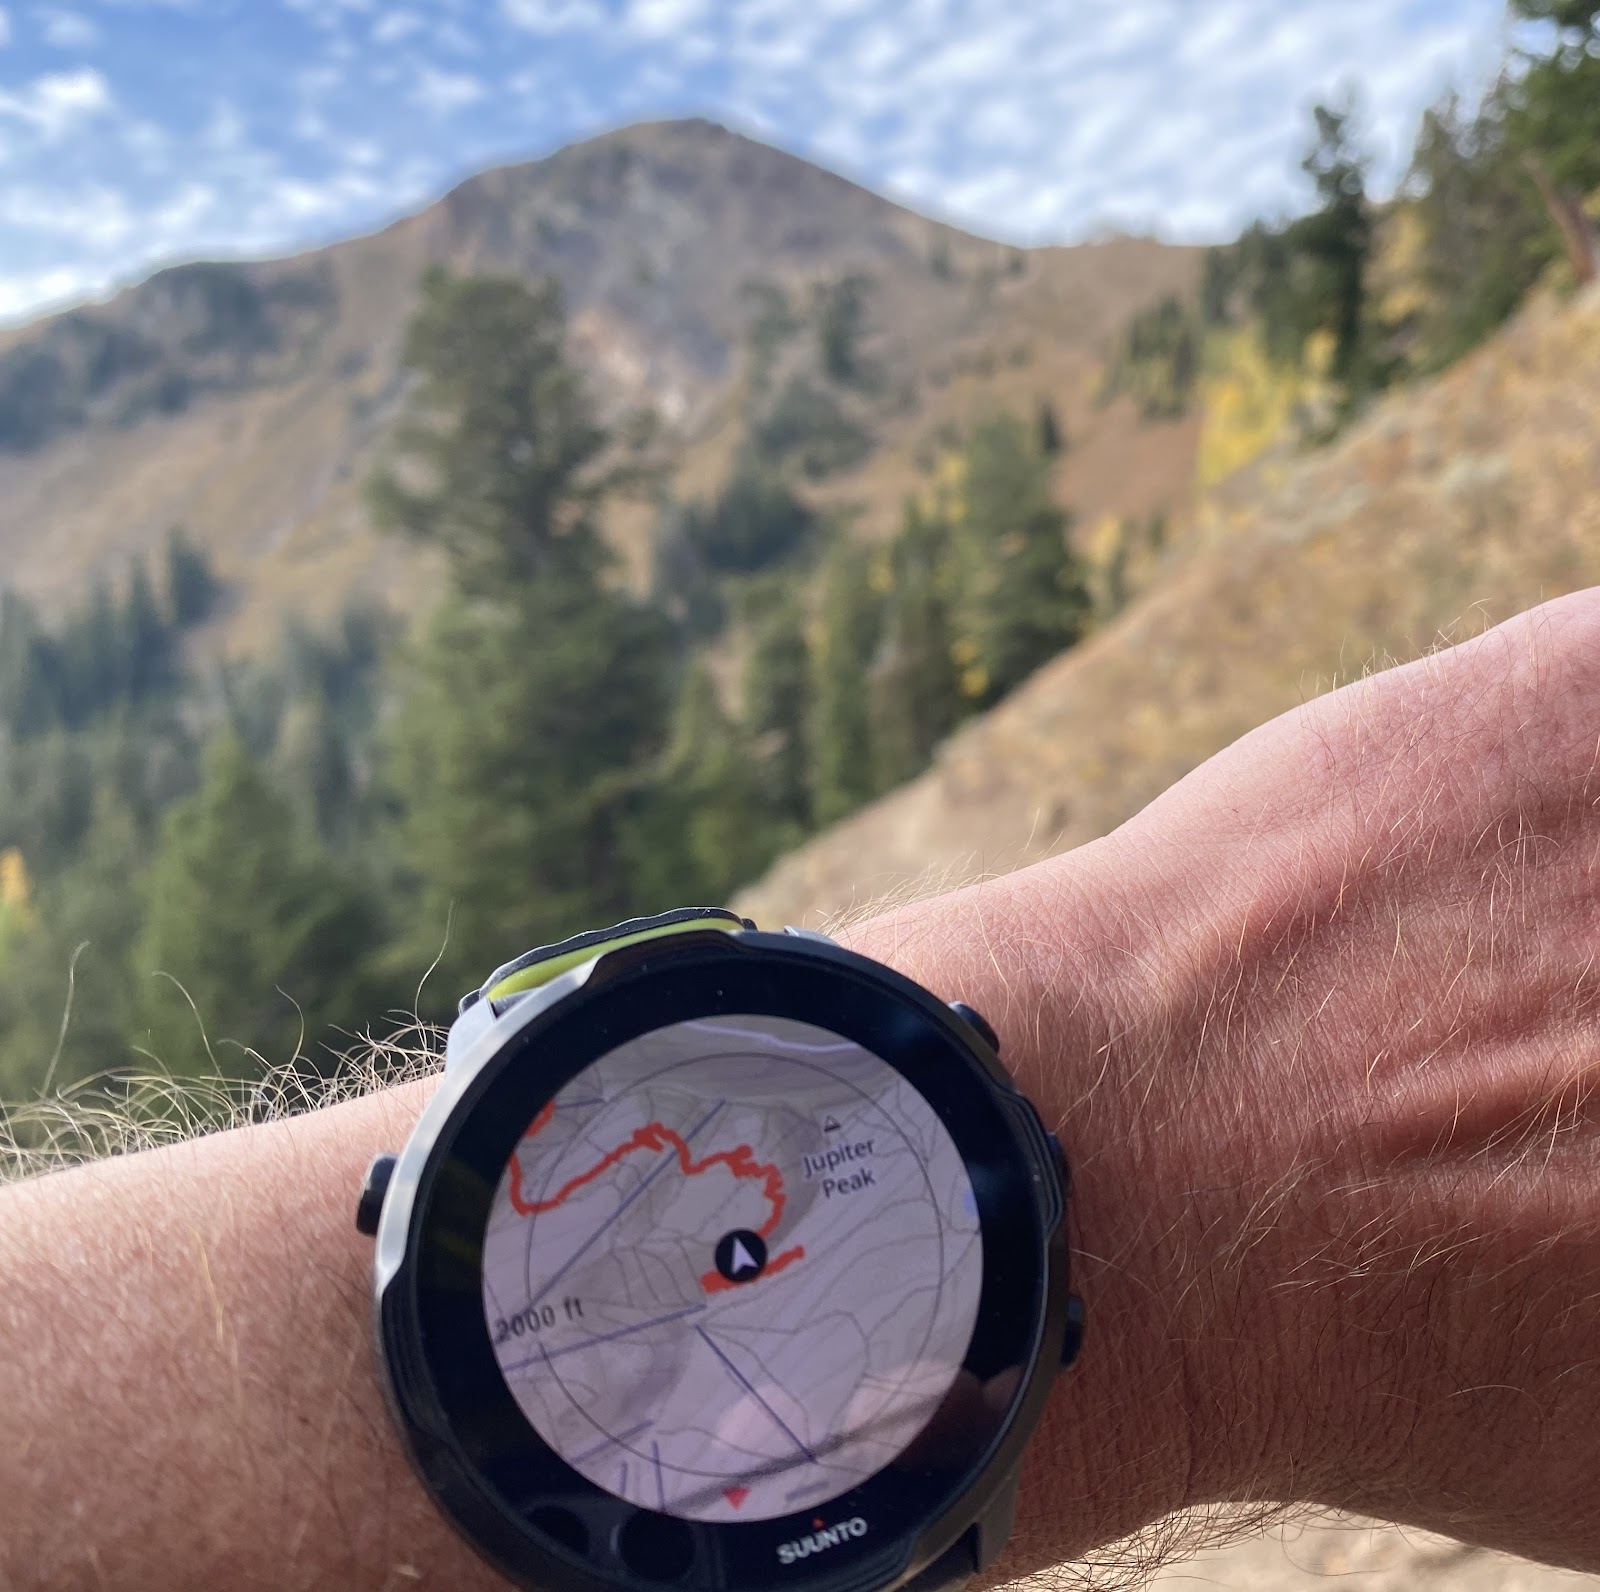 Suunto 7 Wear OS smartwatch: Good specs, GPS, and fitness-focused